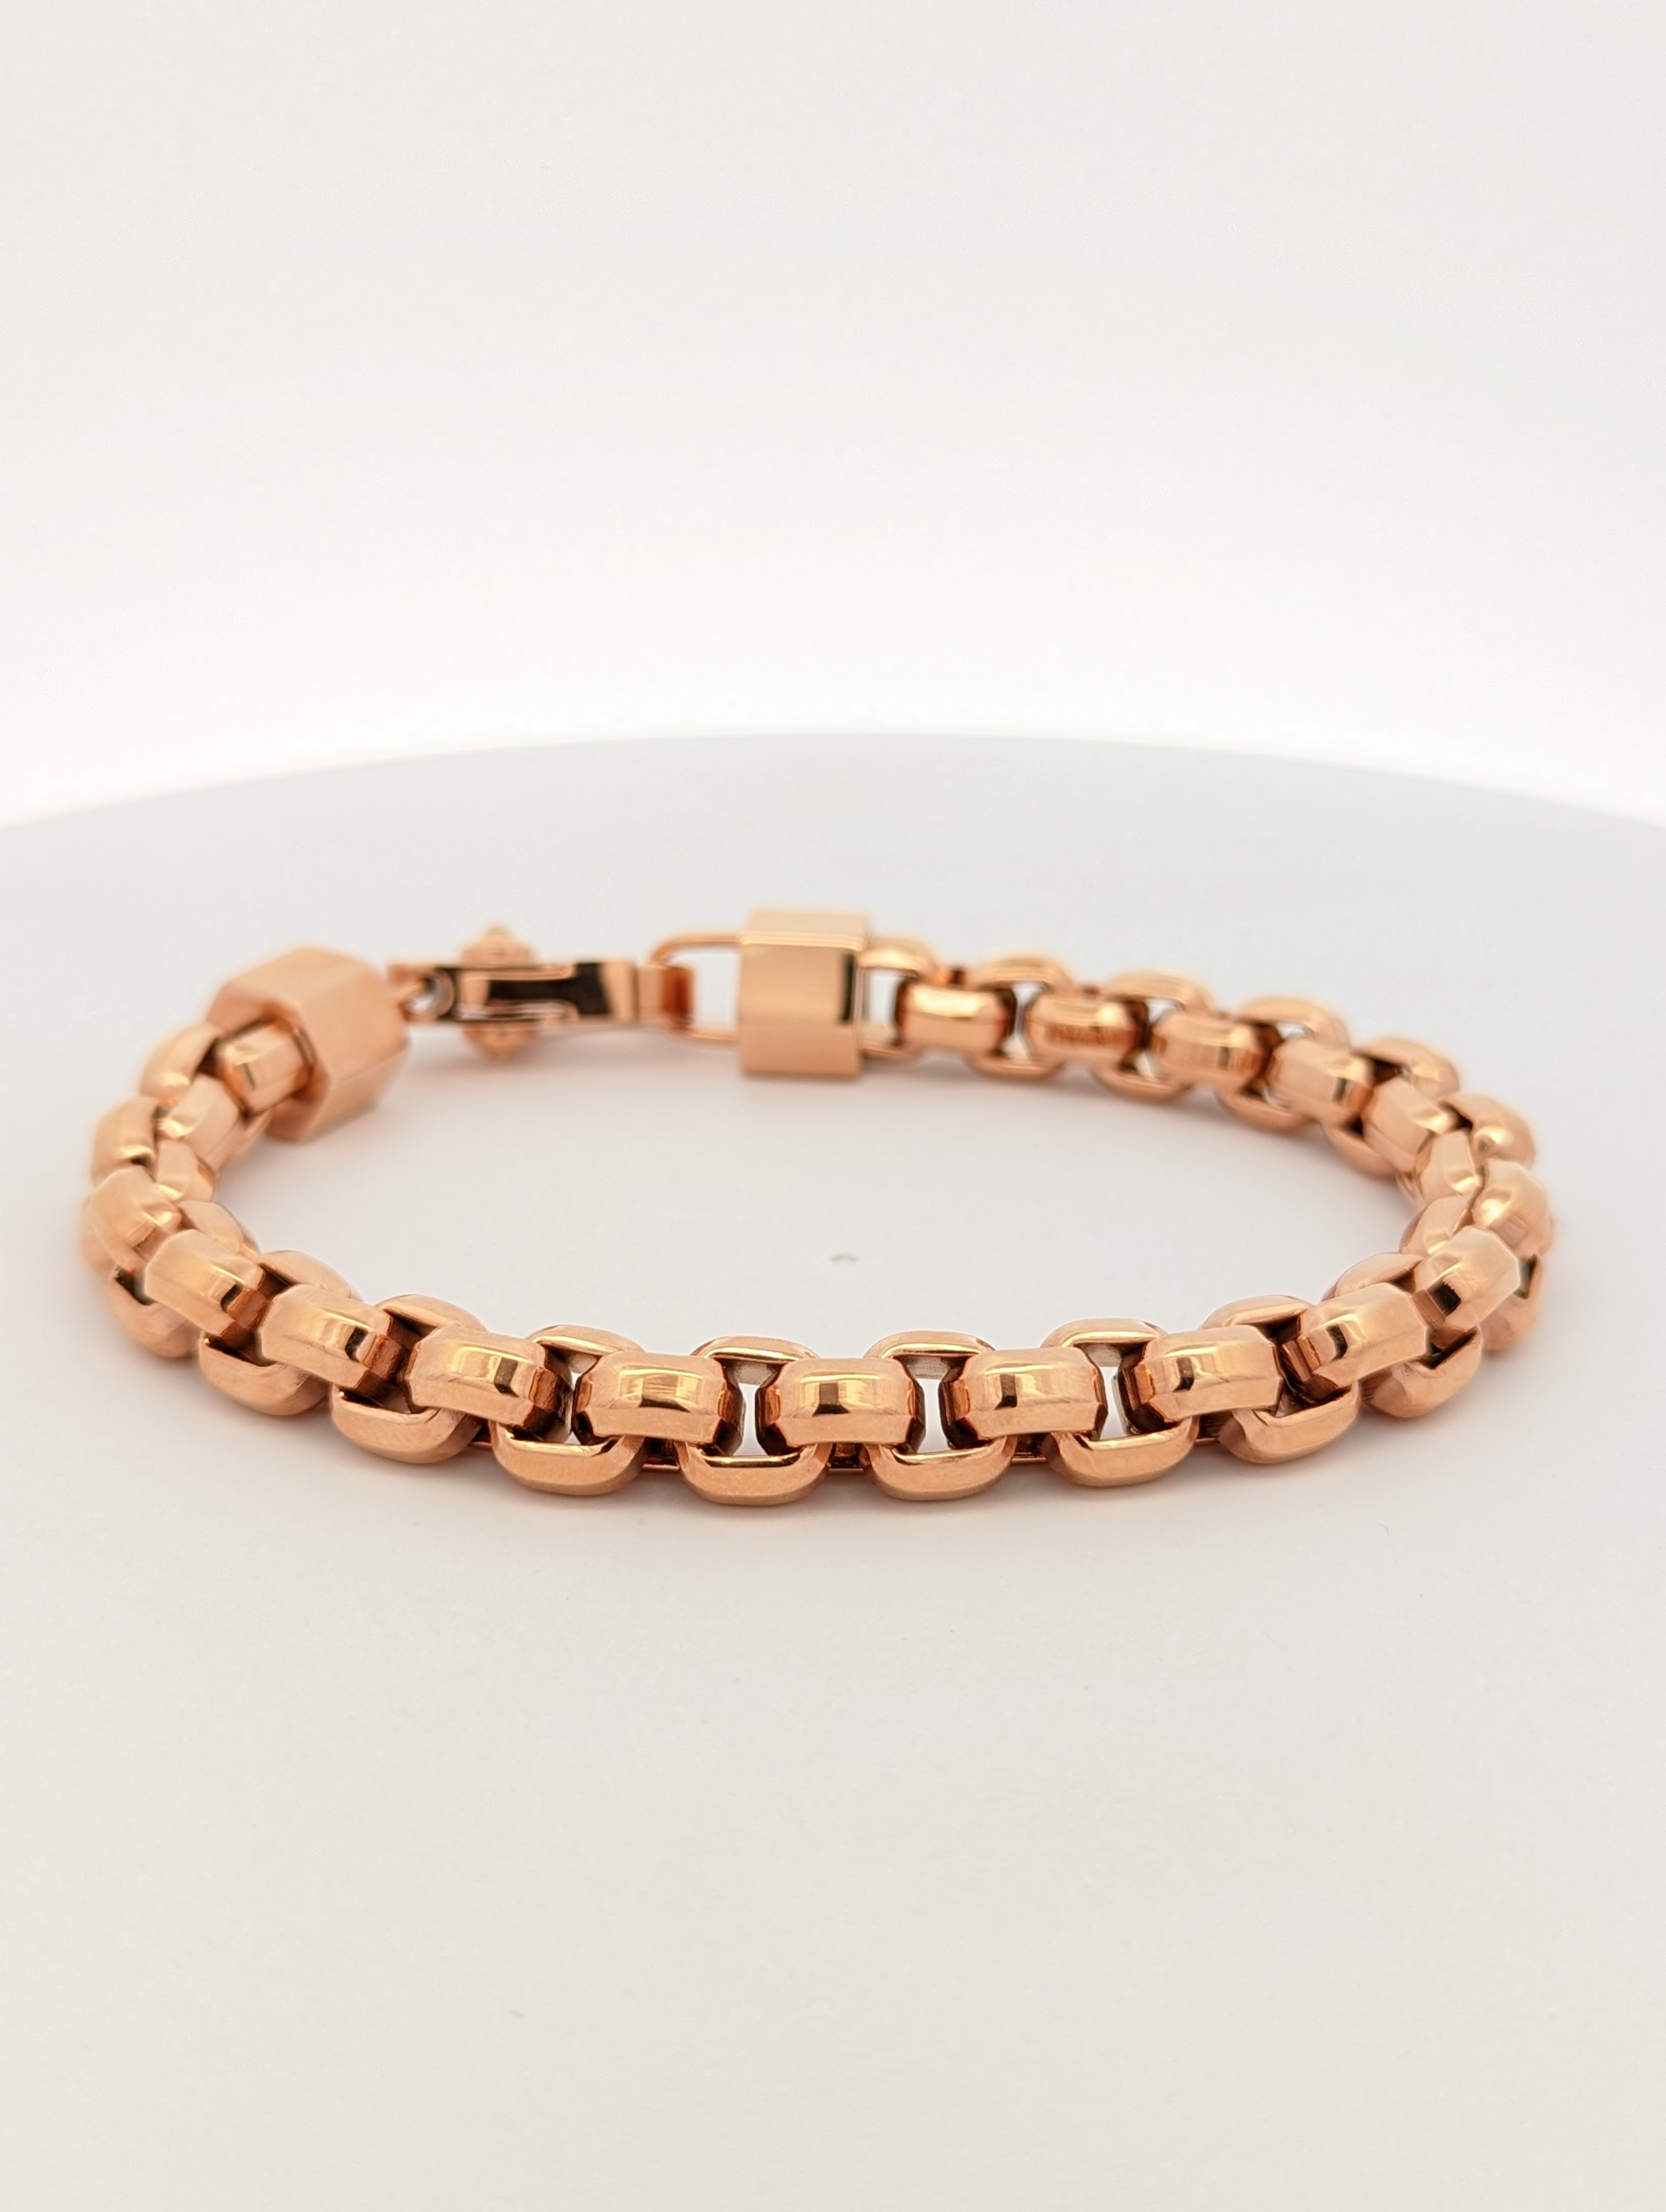 Amazing Tips for Choosing the Right Bracelet to Complement Your Style || Classic gold curb chain barcelet ||